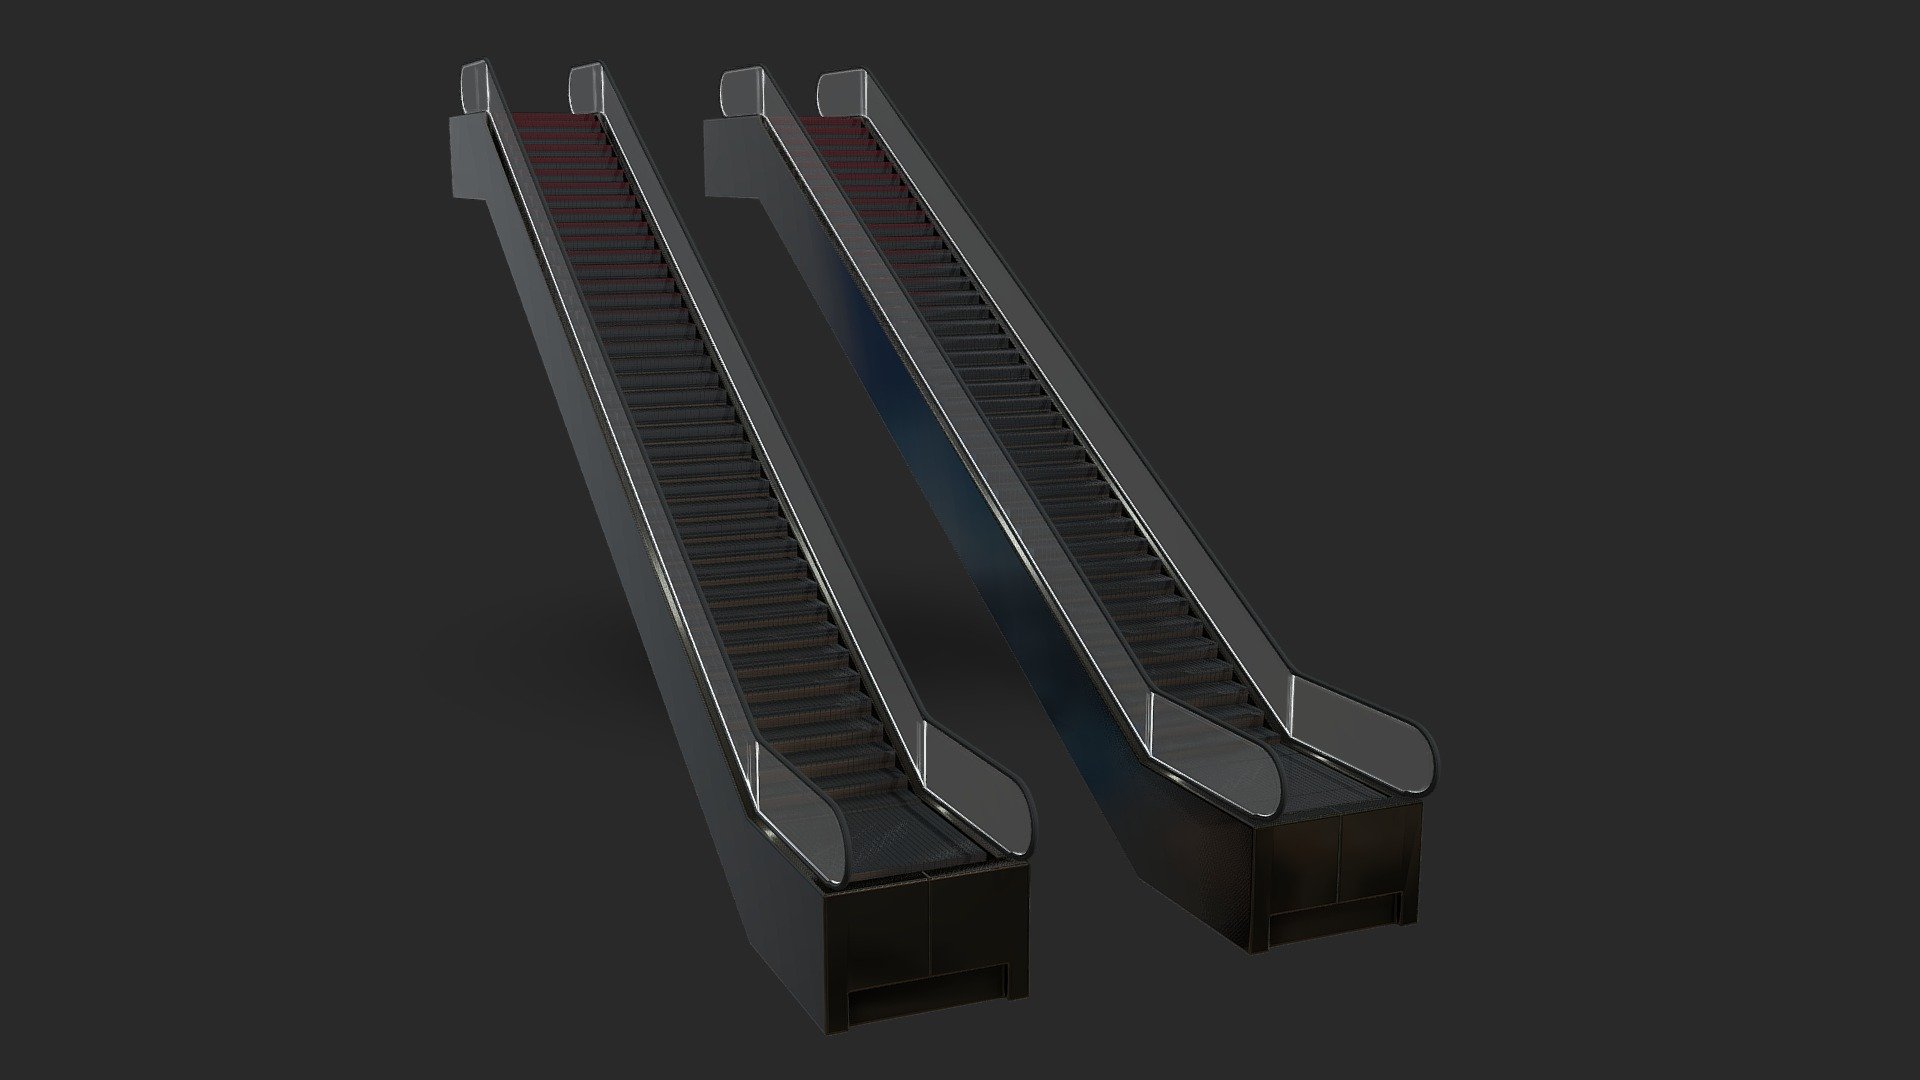 1 Static Escalator
1 Animated Geometry Nodes Escalator.

Perfect for Malls, Shopping Centers, Hospitals, Offices, and more.
PBR ready, VR ready 3d model